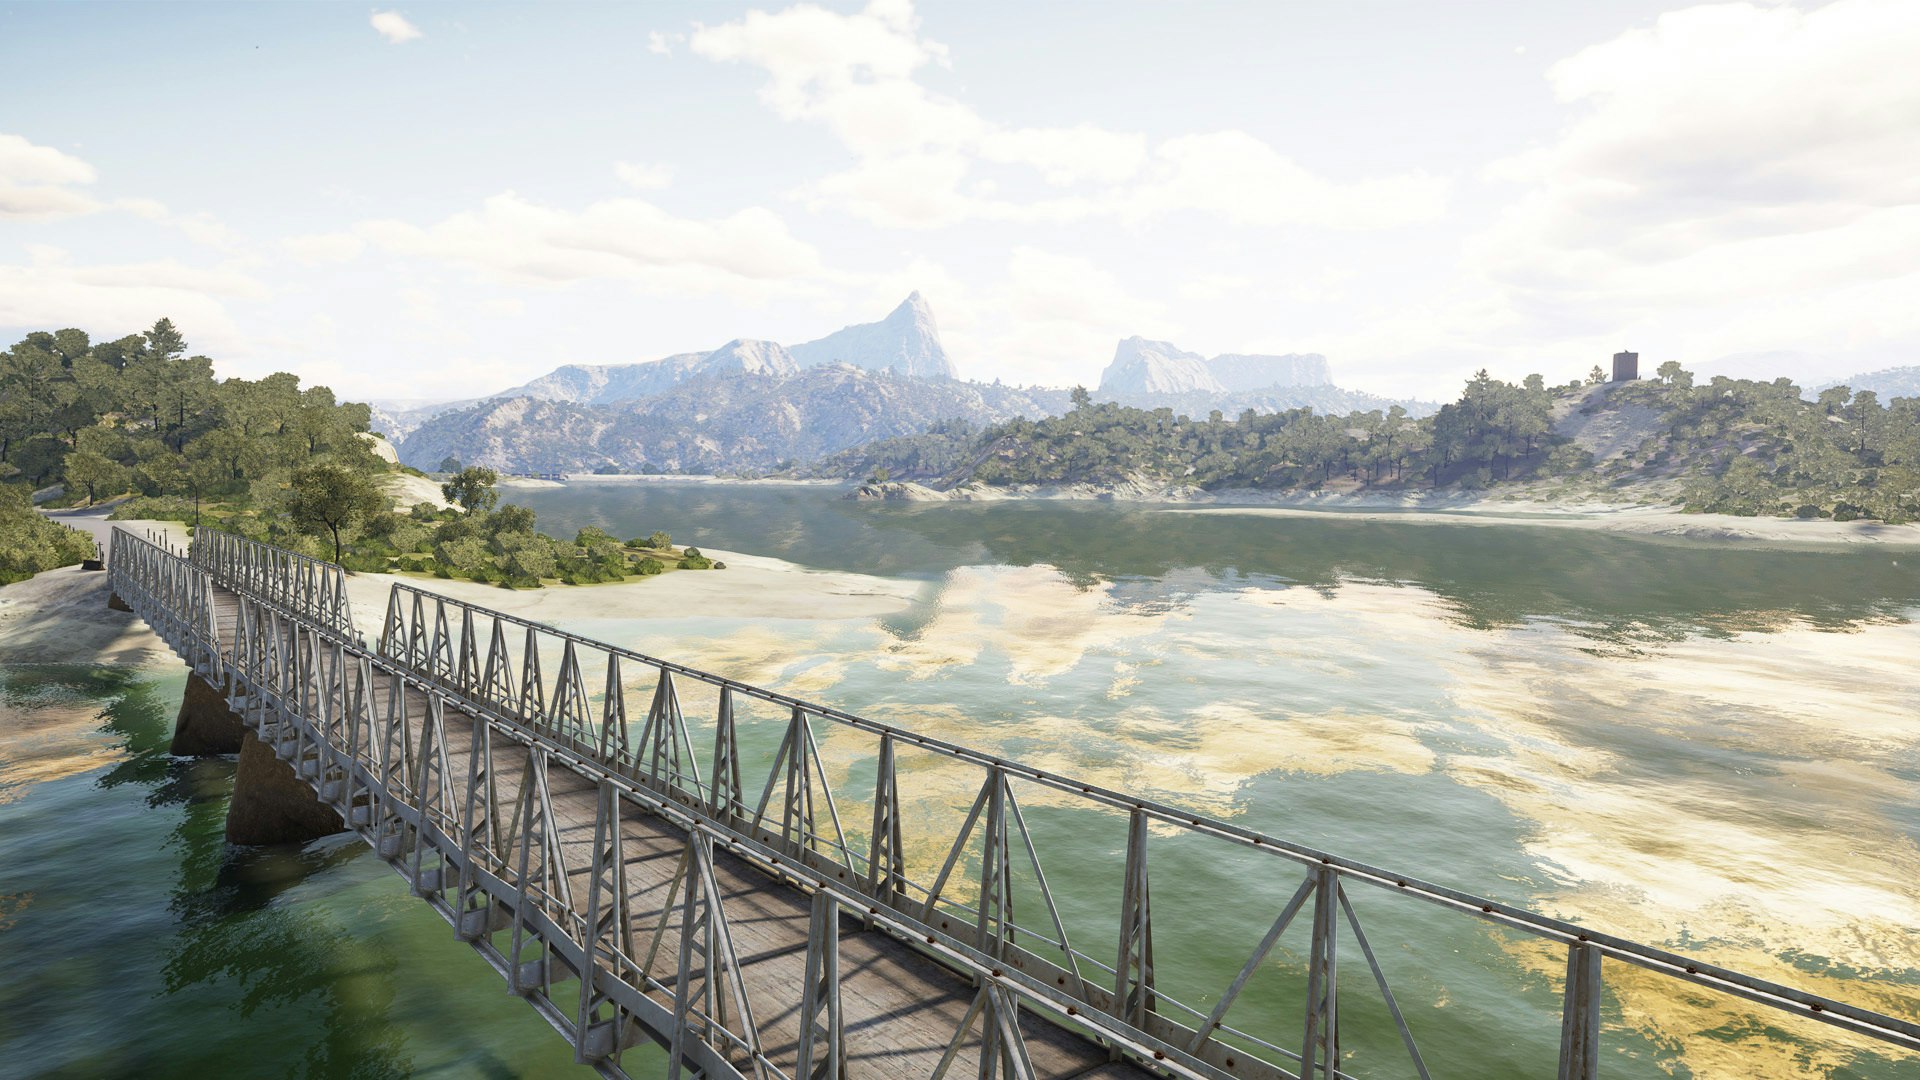 Looking over a bridge at a large water body vista in Call of the Wild: The Angler's Spain Reserve.